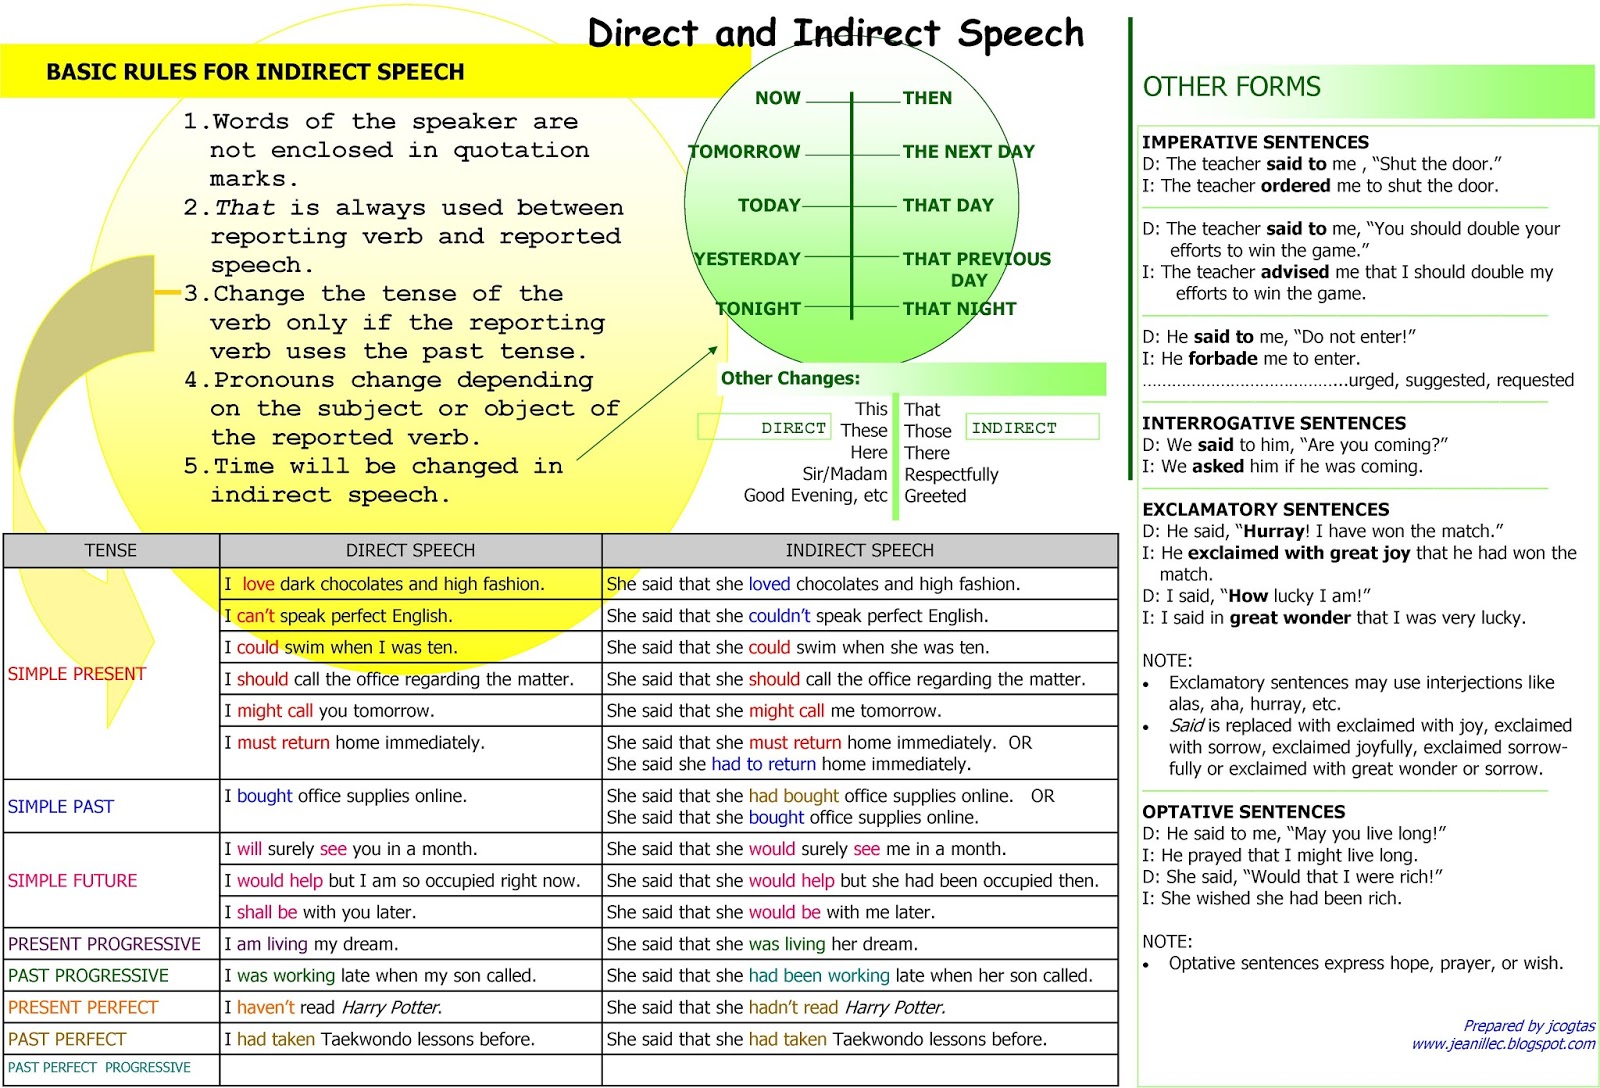 Reported speech may might. Direct indirect Speech таблица. Таблица direct and reported Speech. Direct indirect reported Speech. Direct Speech reported Speech таблица.